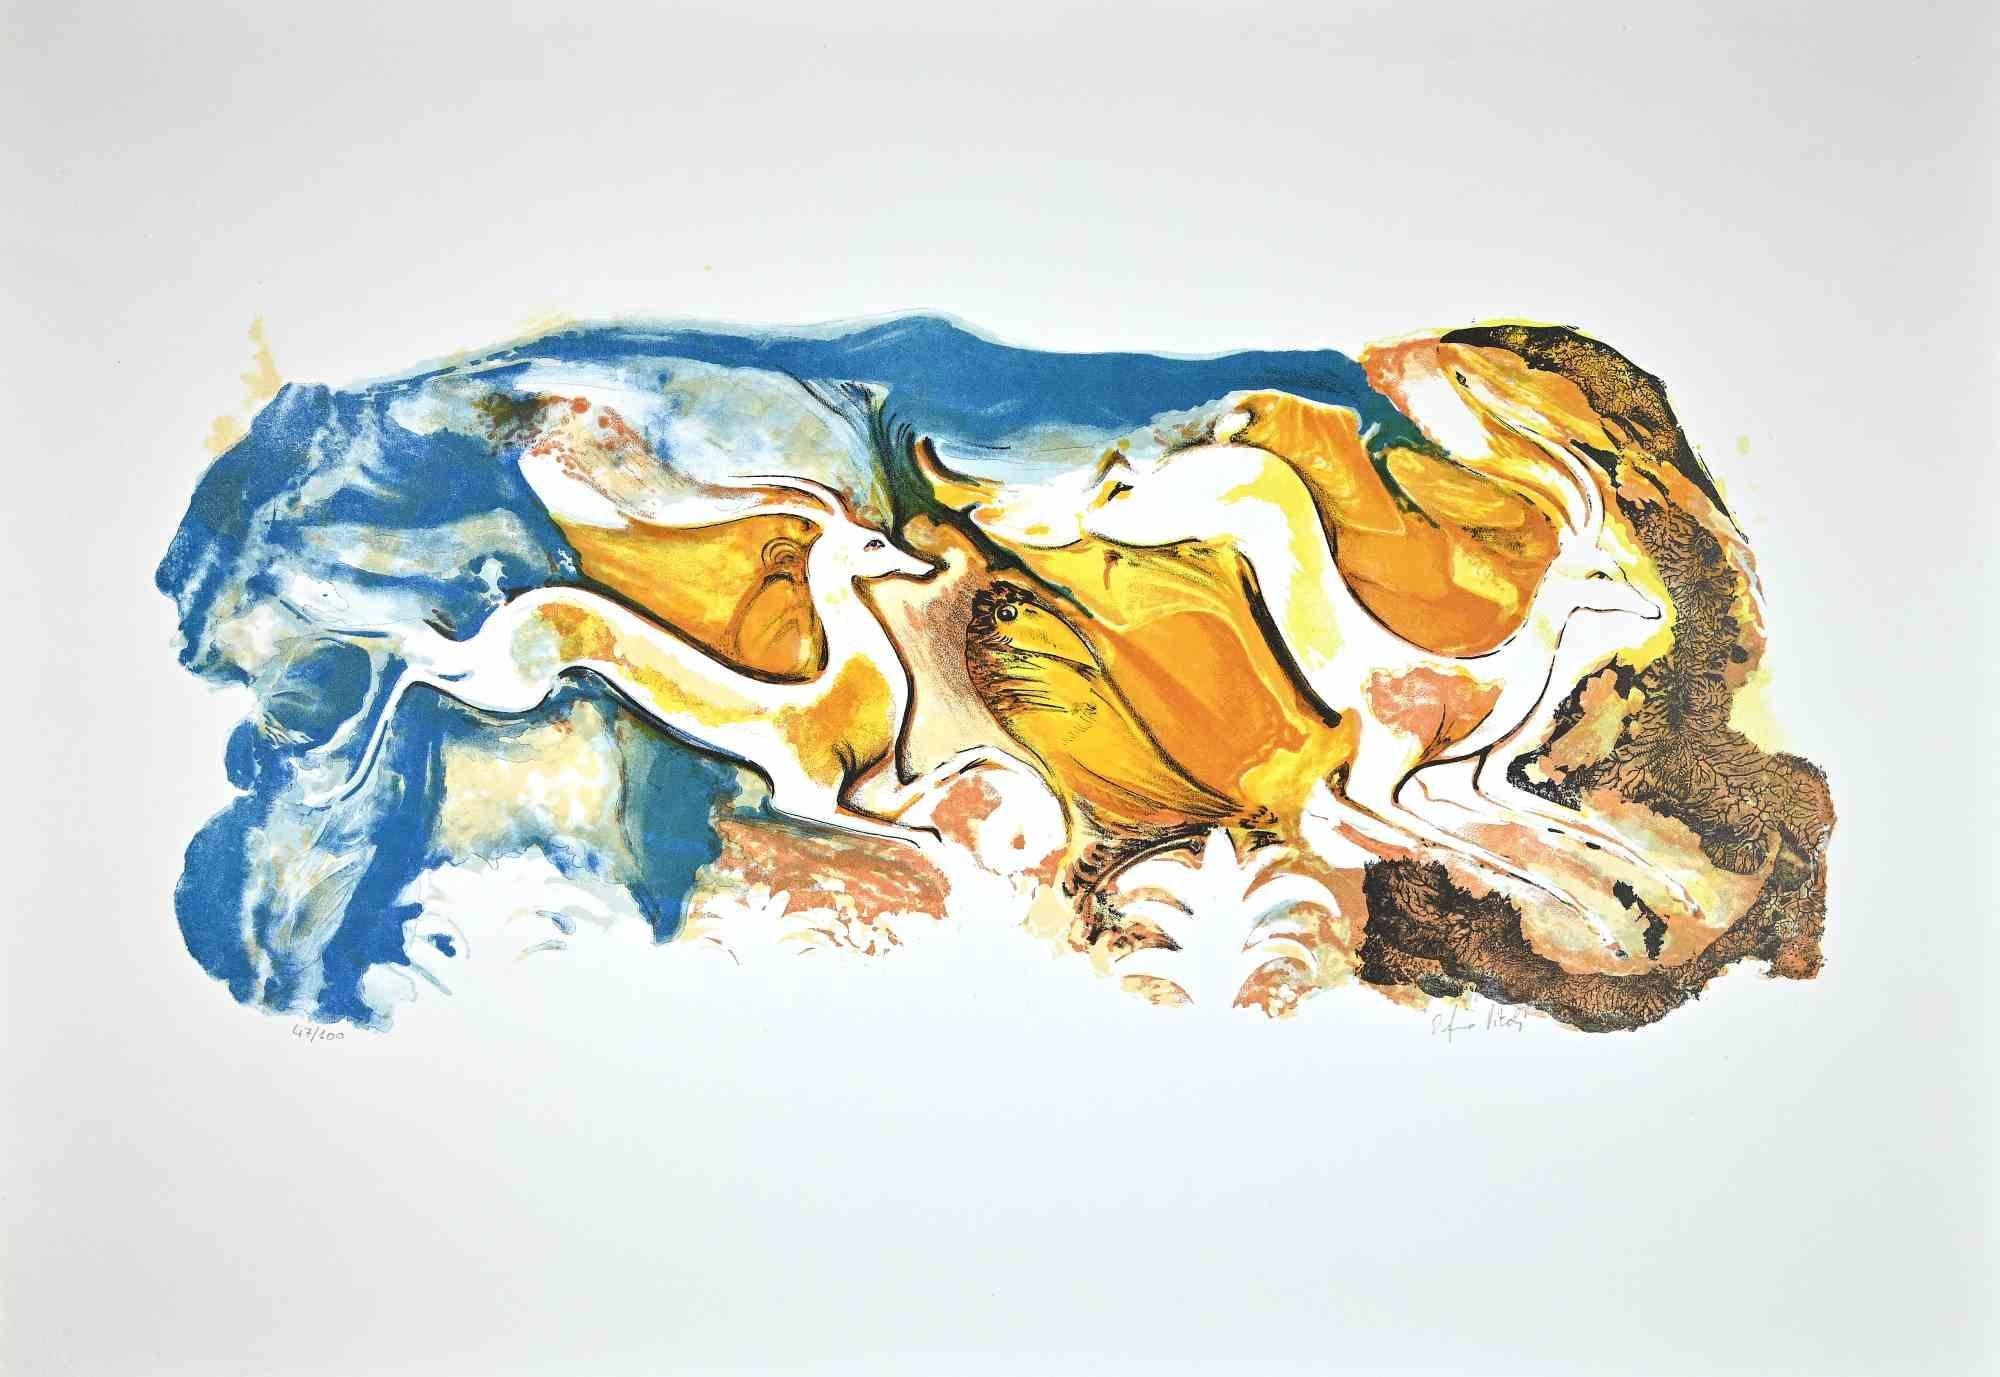 Deers is an original Lithograph realized by Orfeo Vitali in the 1970.

Hand-signed.

Numbered. Edition of /100.

The artwork is depicted in harmonious colors in a well-balanced composition.